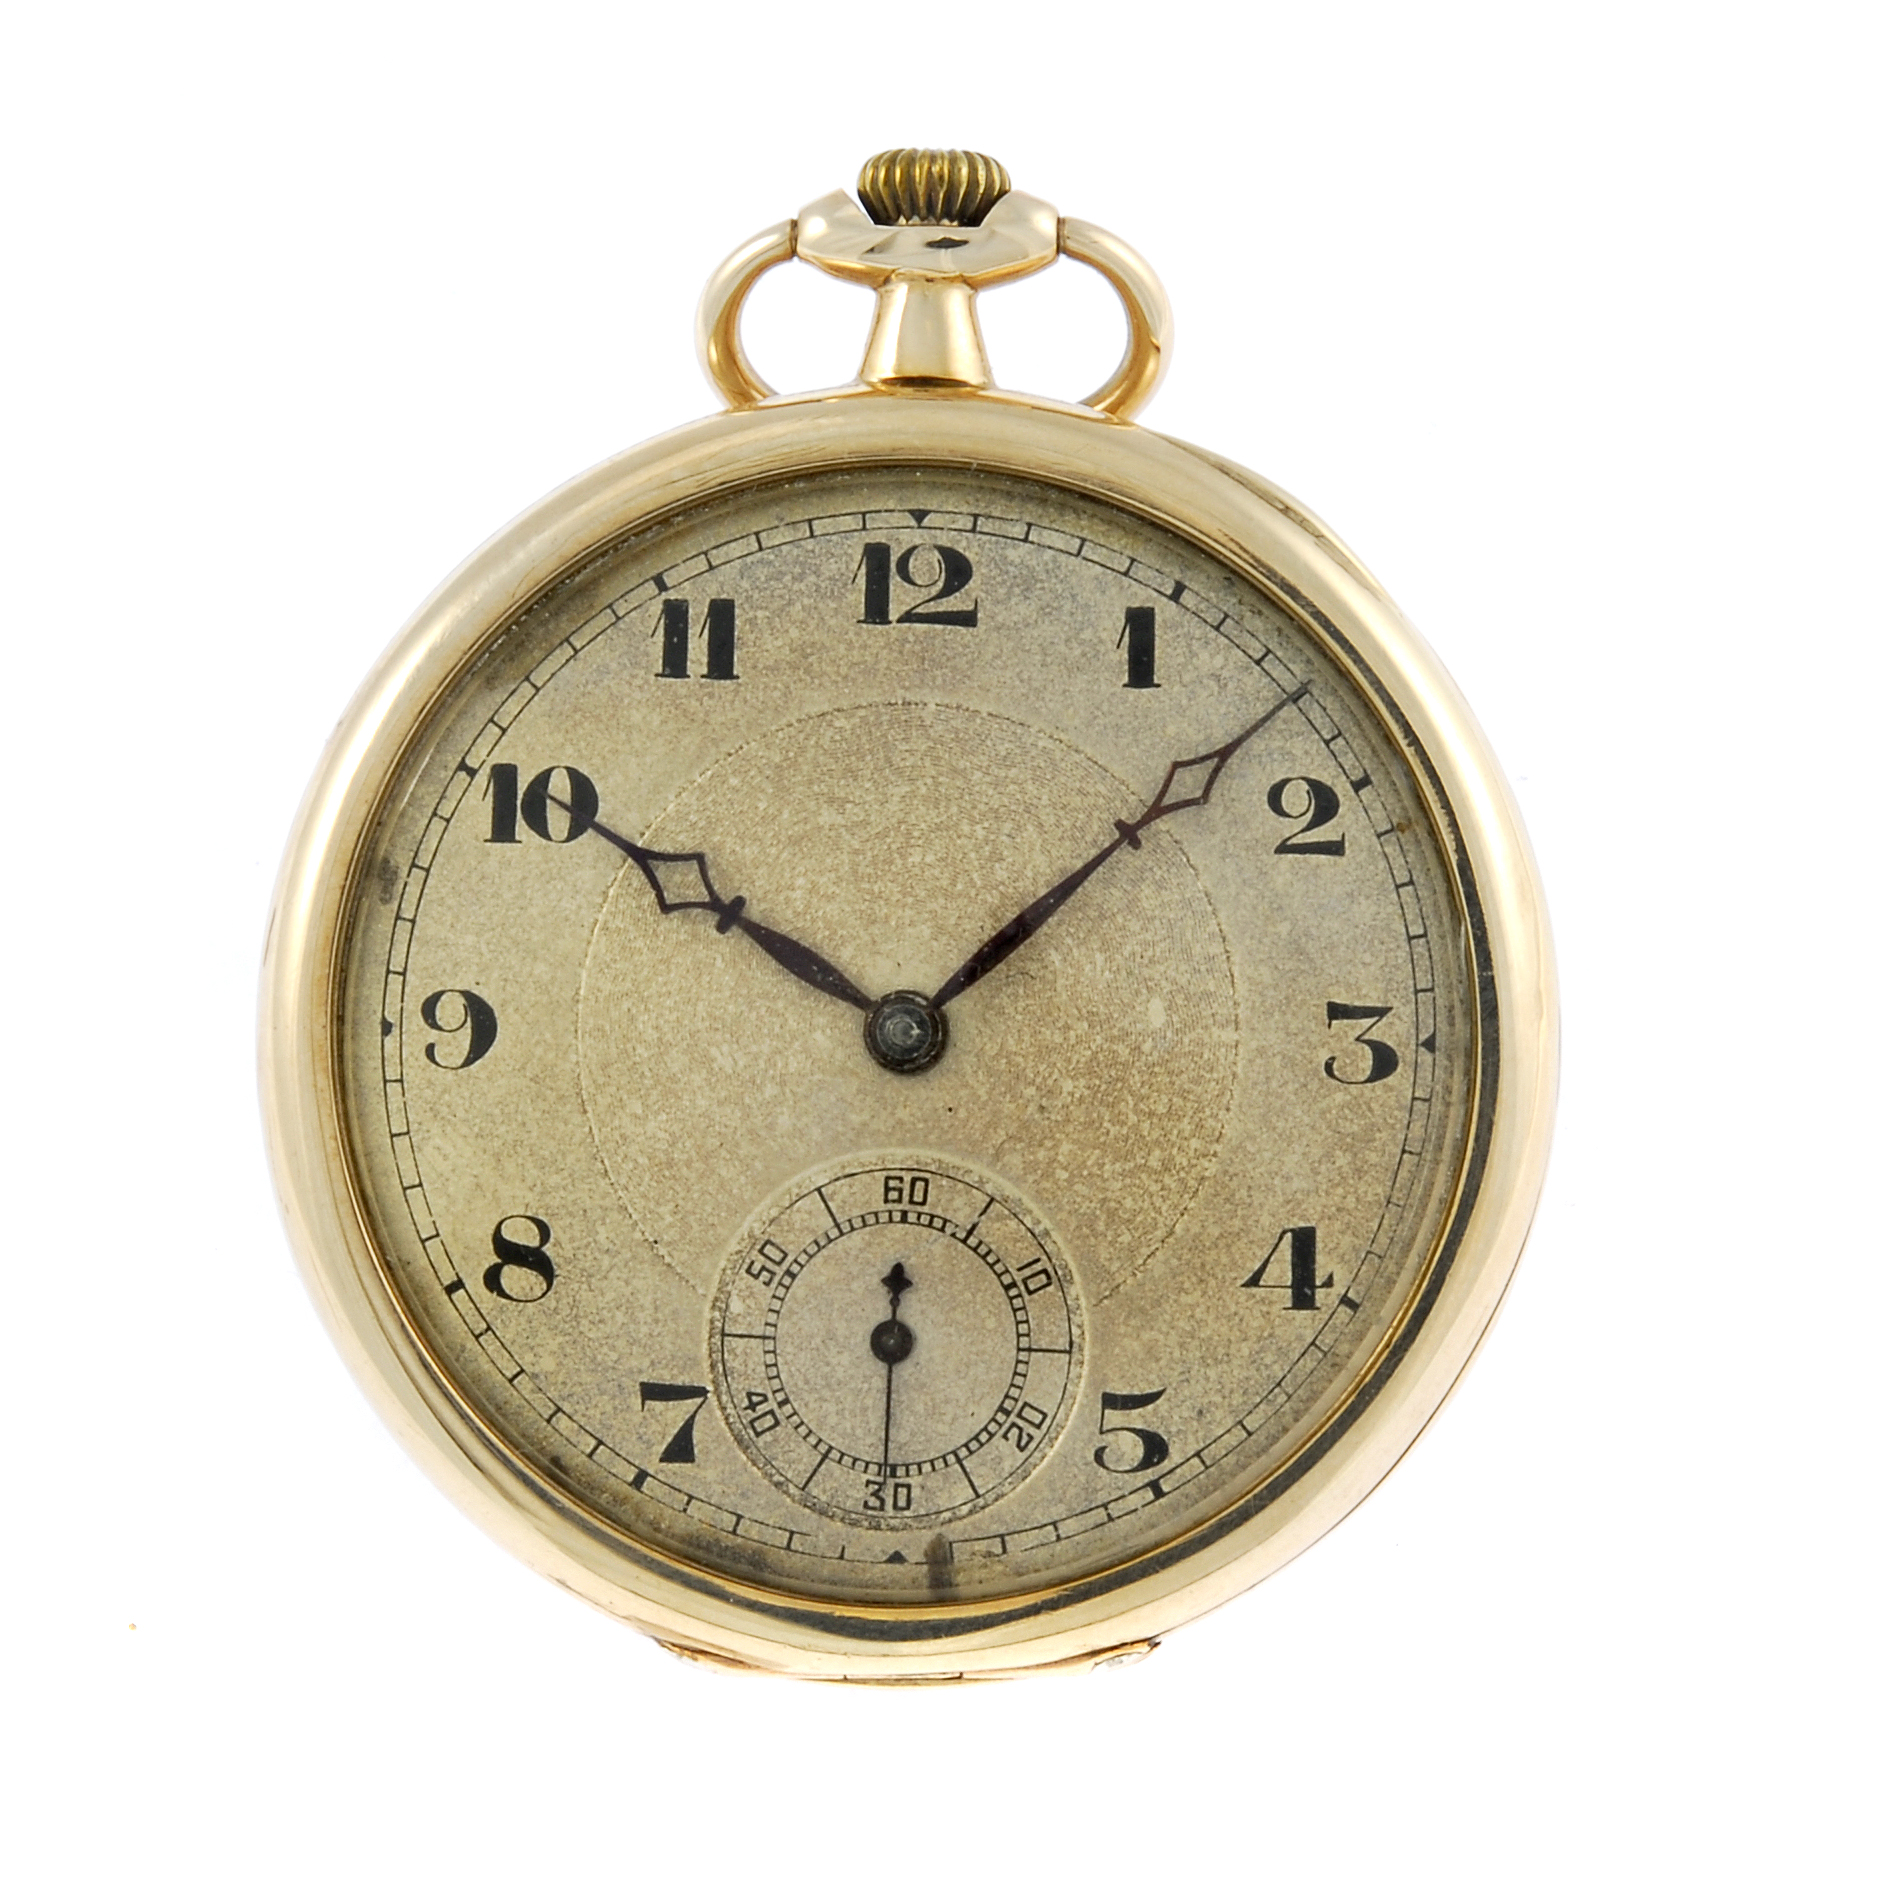 An open face pocket watch. 9ct yellow gold case with engraved monogram to the case back, import